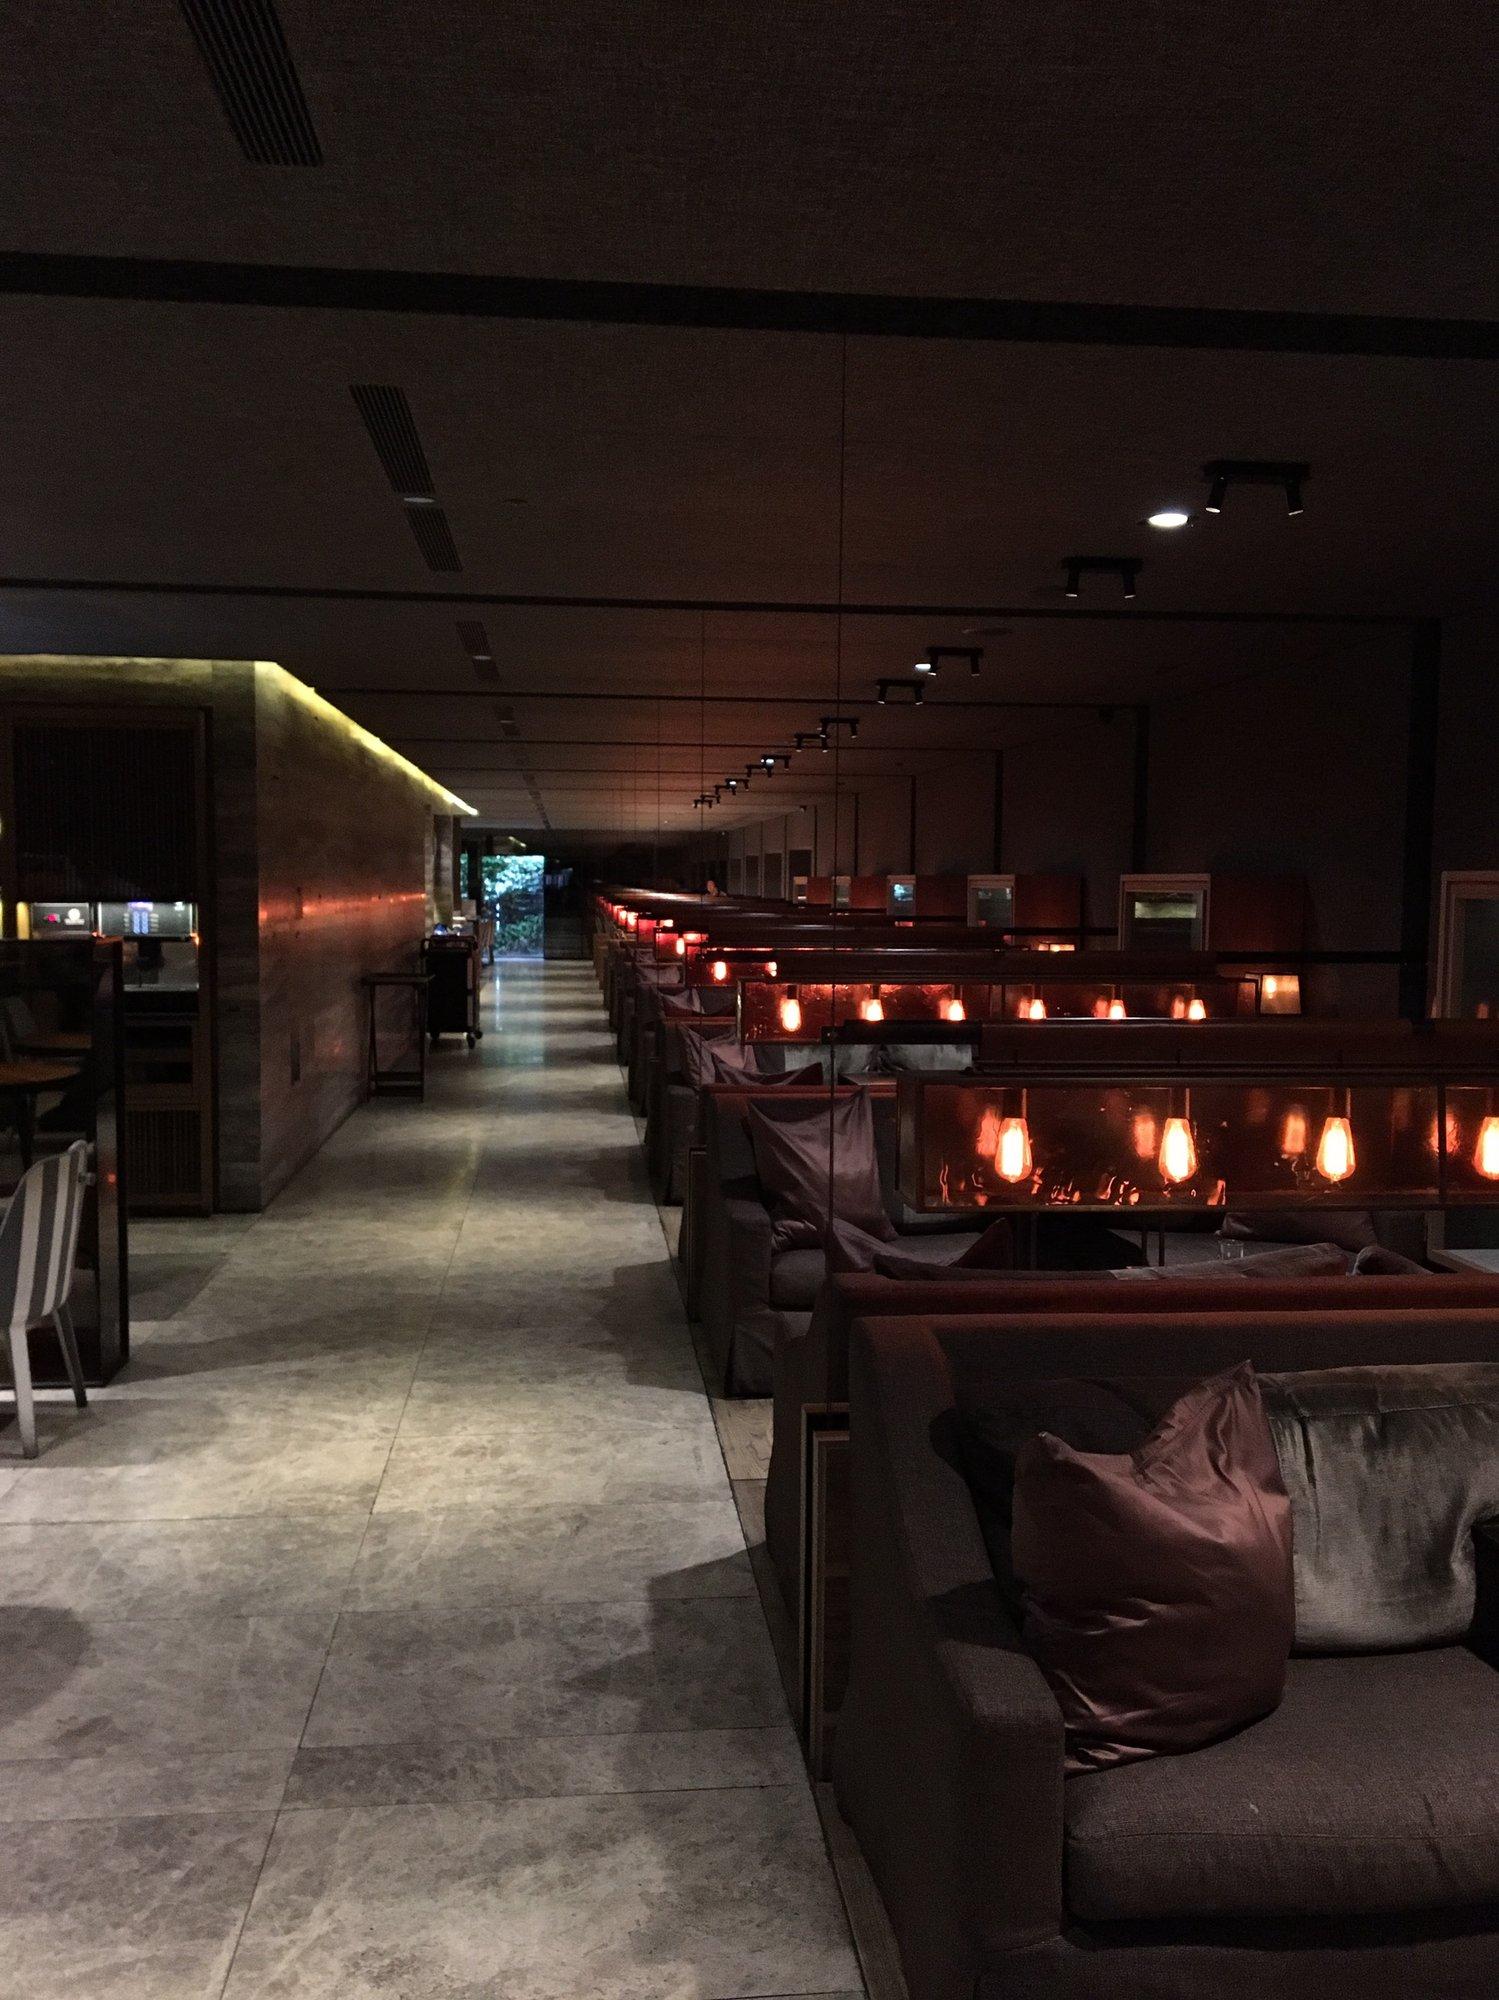 China Airlines Lounge (V1) image 36 of 44